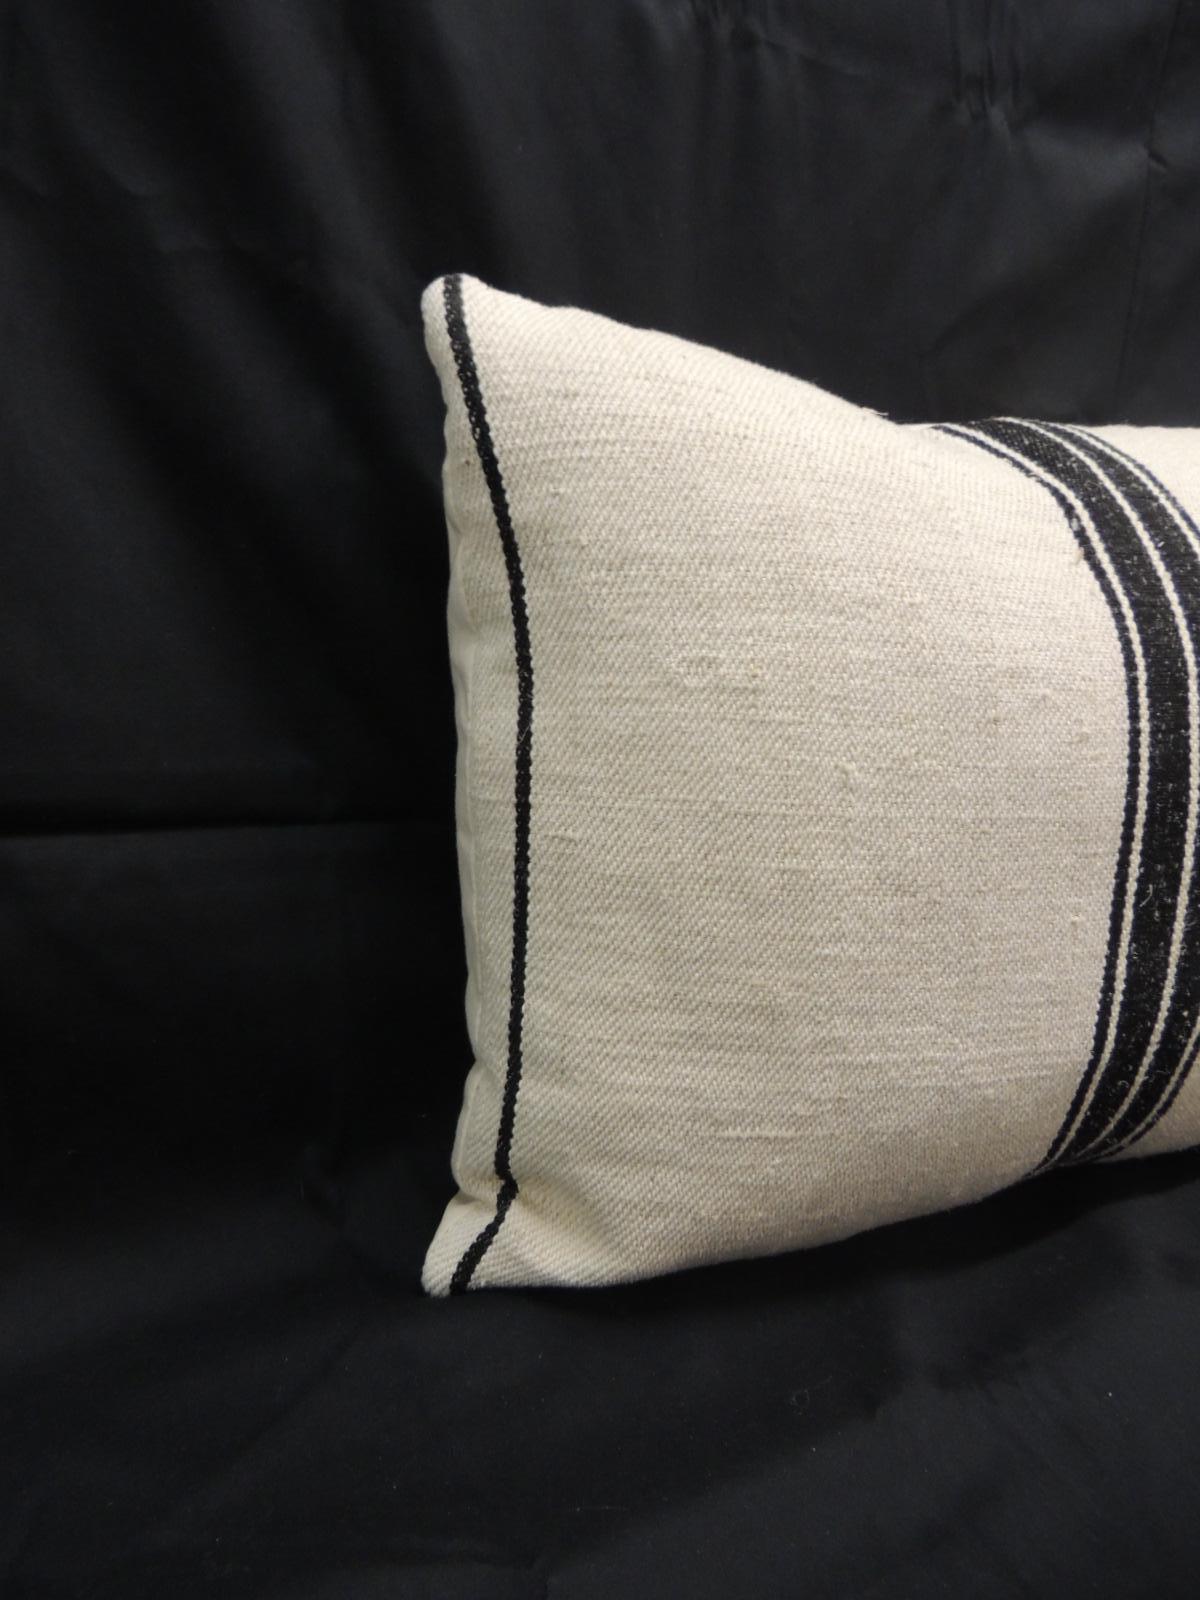 19th century French stripes lumbar decorative pillow in natural and black.
Decorative pillow textile show vertical stripes on tan with a woven homespun textile.
French decorative cushion finalized with natural linen backing. Throw pillow in shades